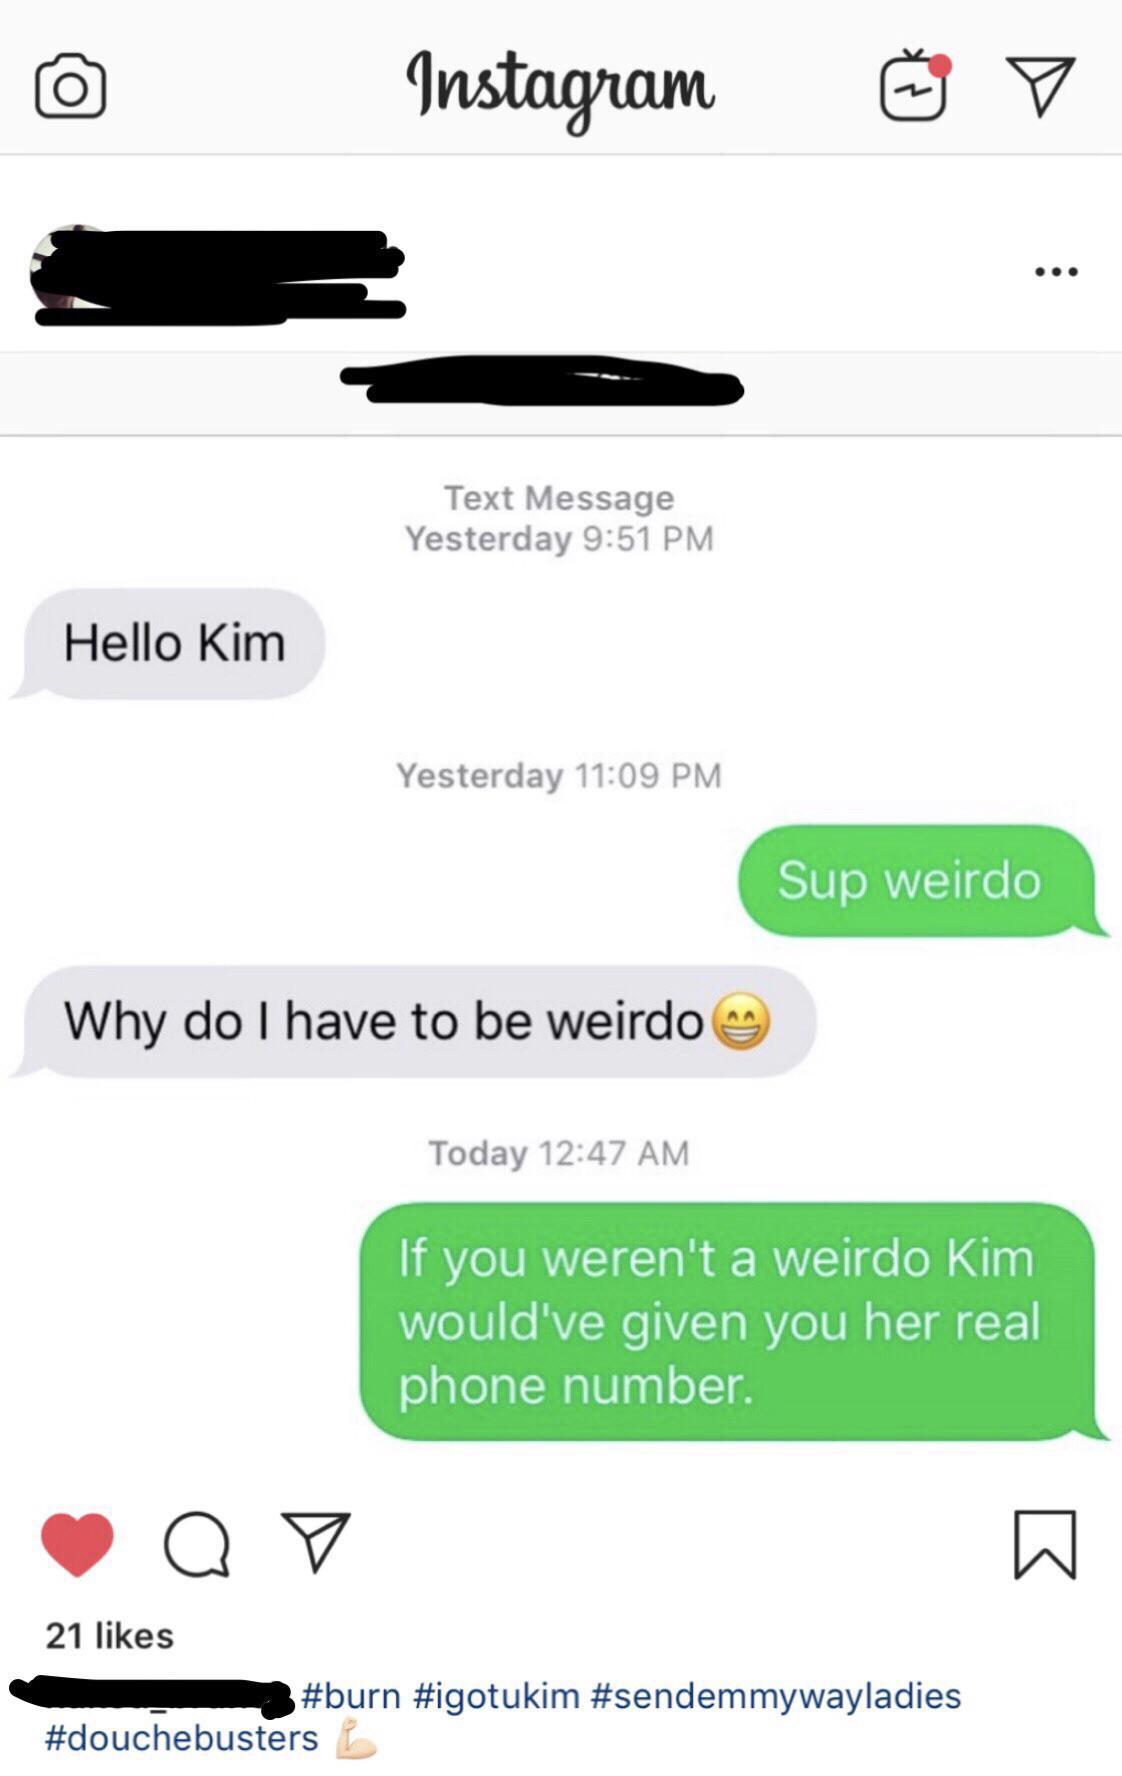 Instagram v Text Message Yesterday Hello Kim Yesterday Sup weirdo Why do I have to be weirdo Today If you weren't a weirdo Kim would've given you her real phone number.